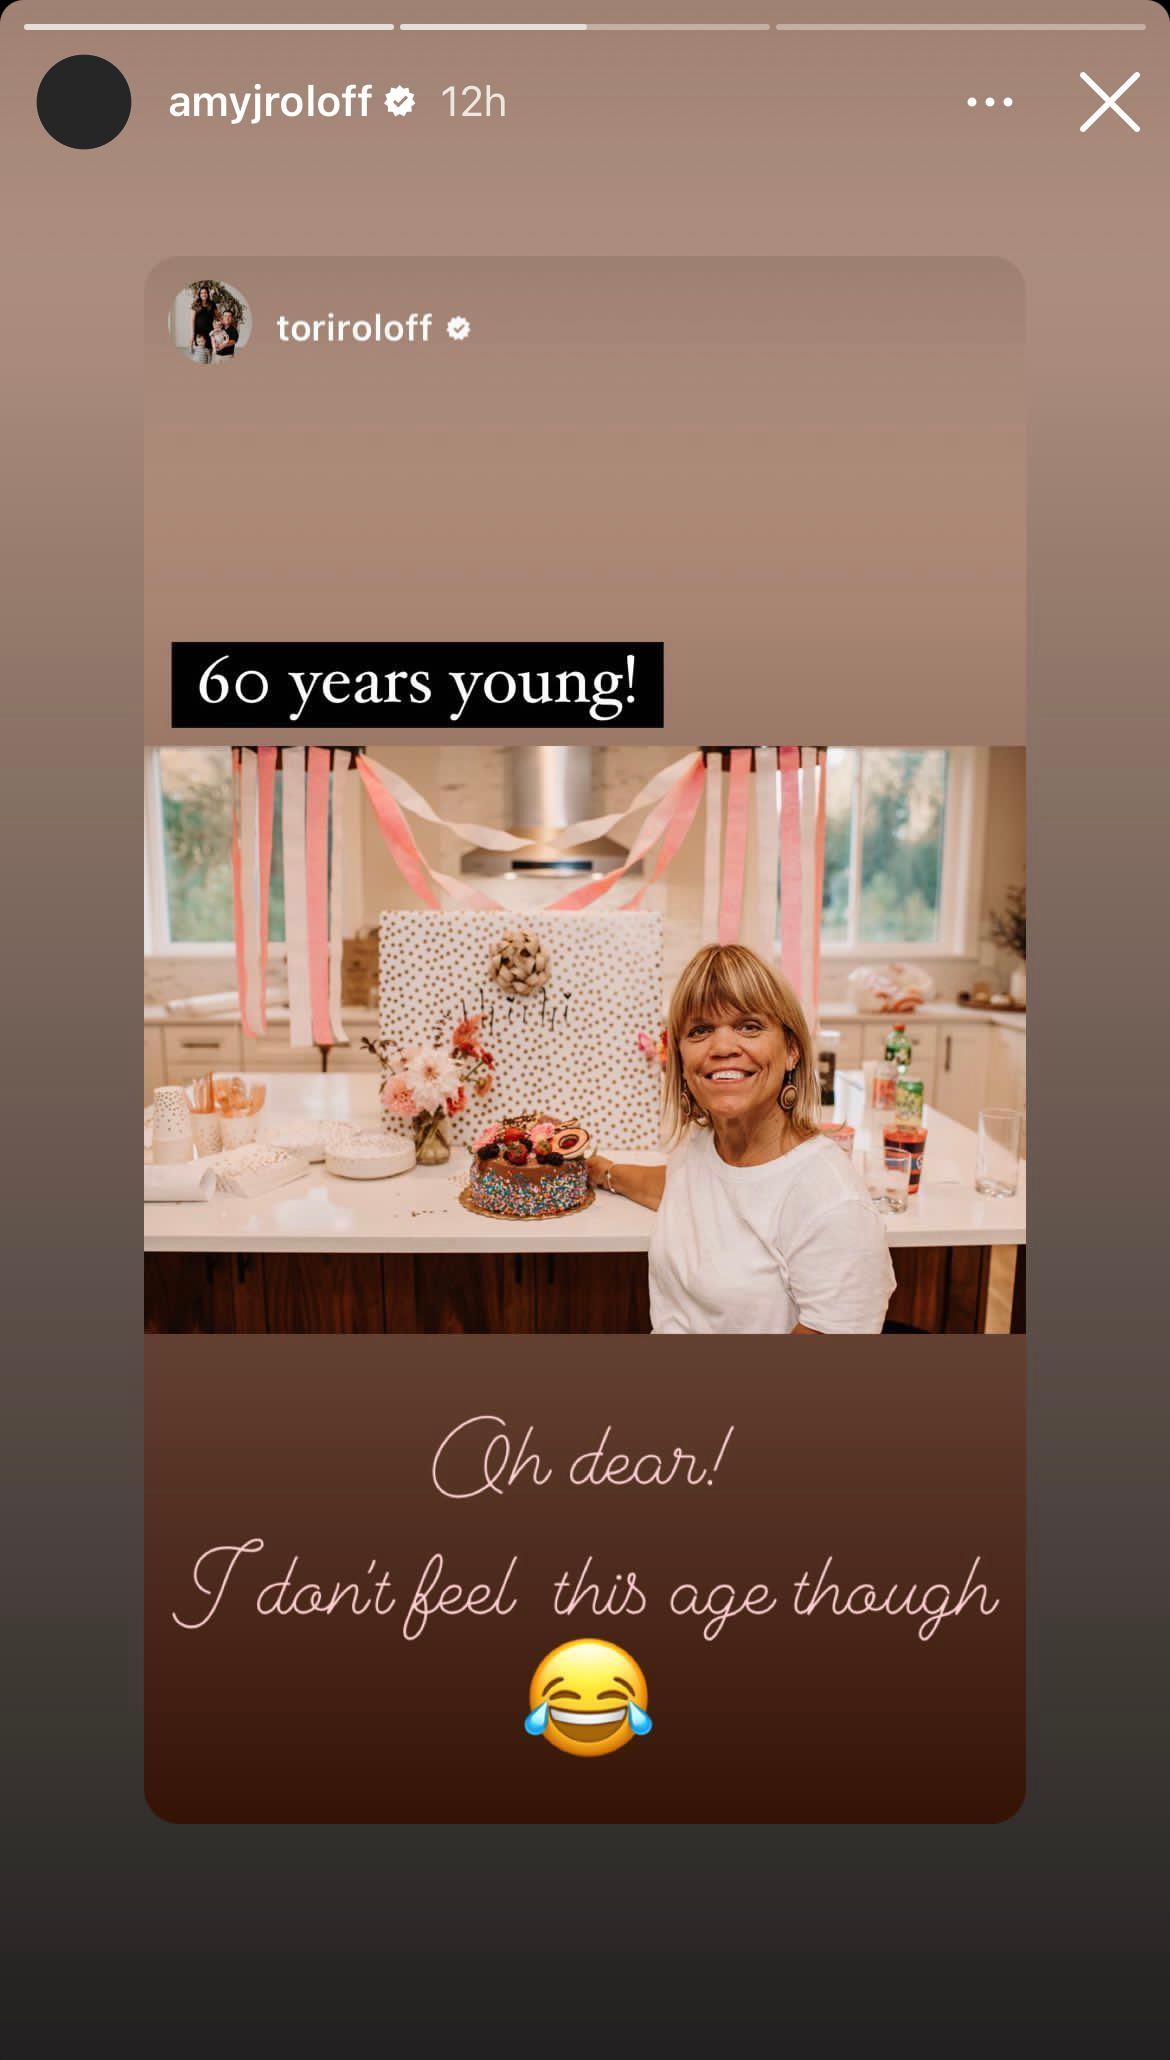 Amy Roloff's post on her Instagram story